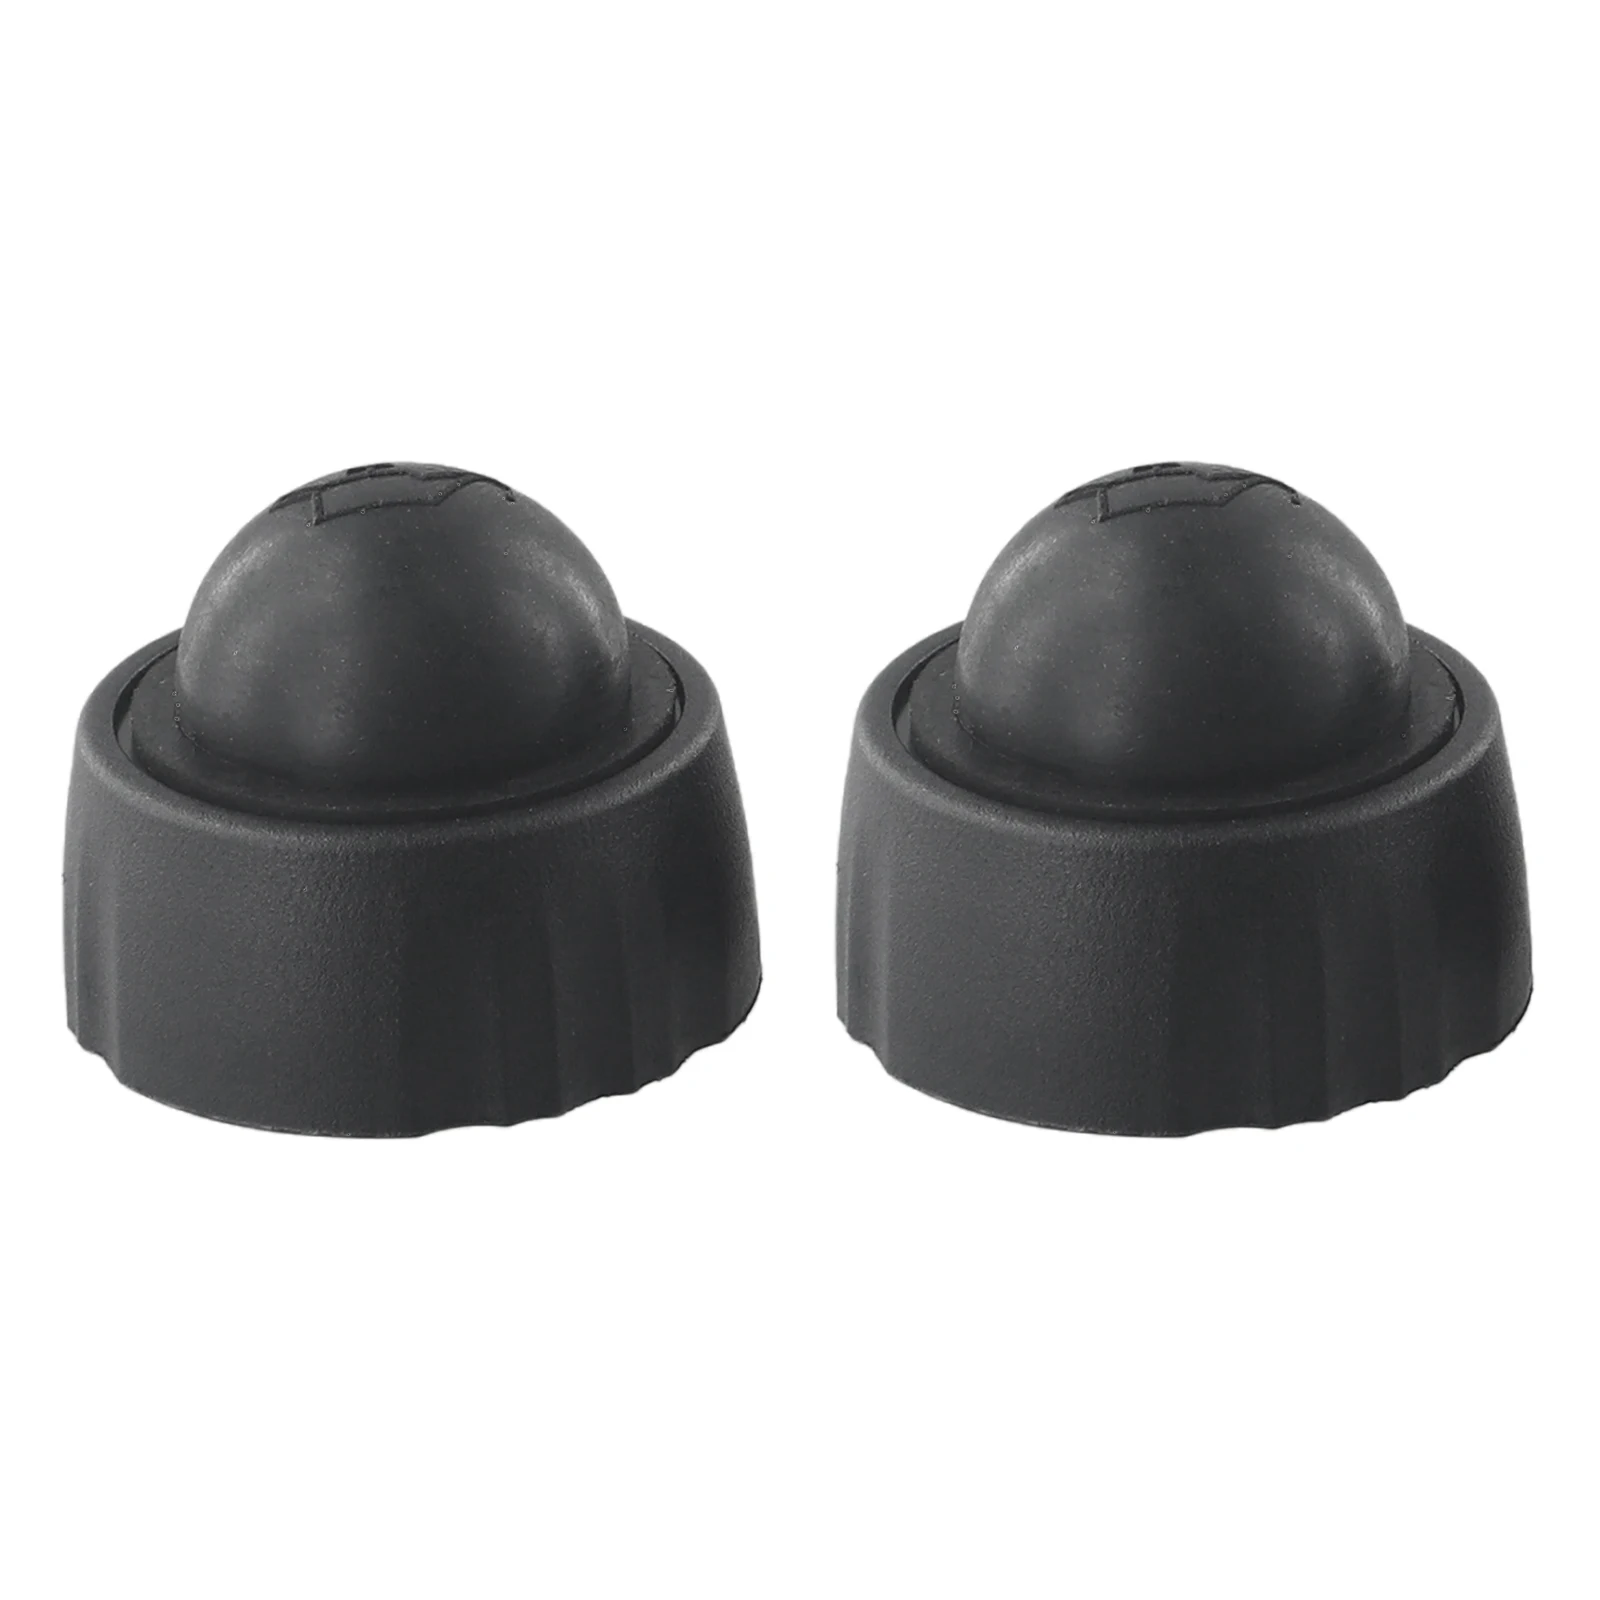 

Ensures Reliable Performance 2pcs Oil Tank Cap Cover Primer for Ryobi Chainsaw Compatible with P540 P541 P542 P545